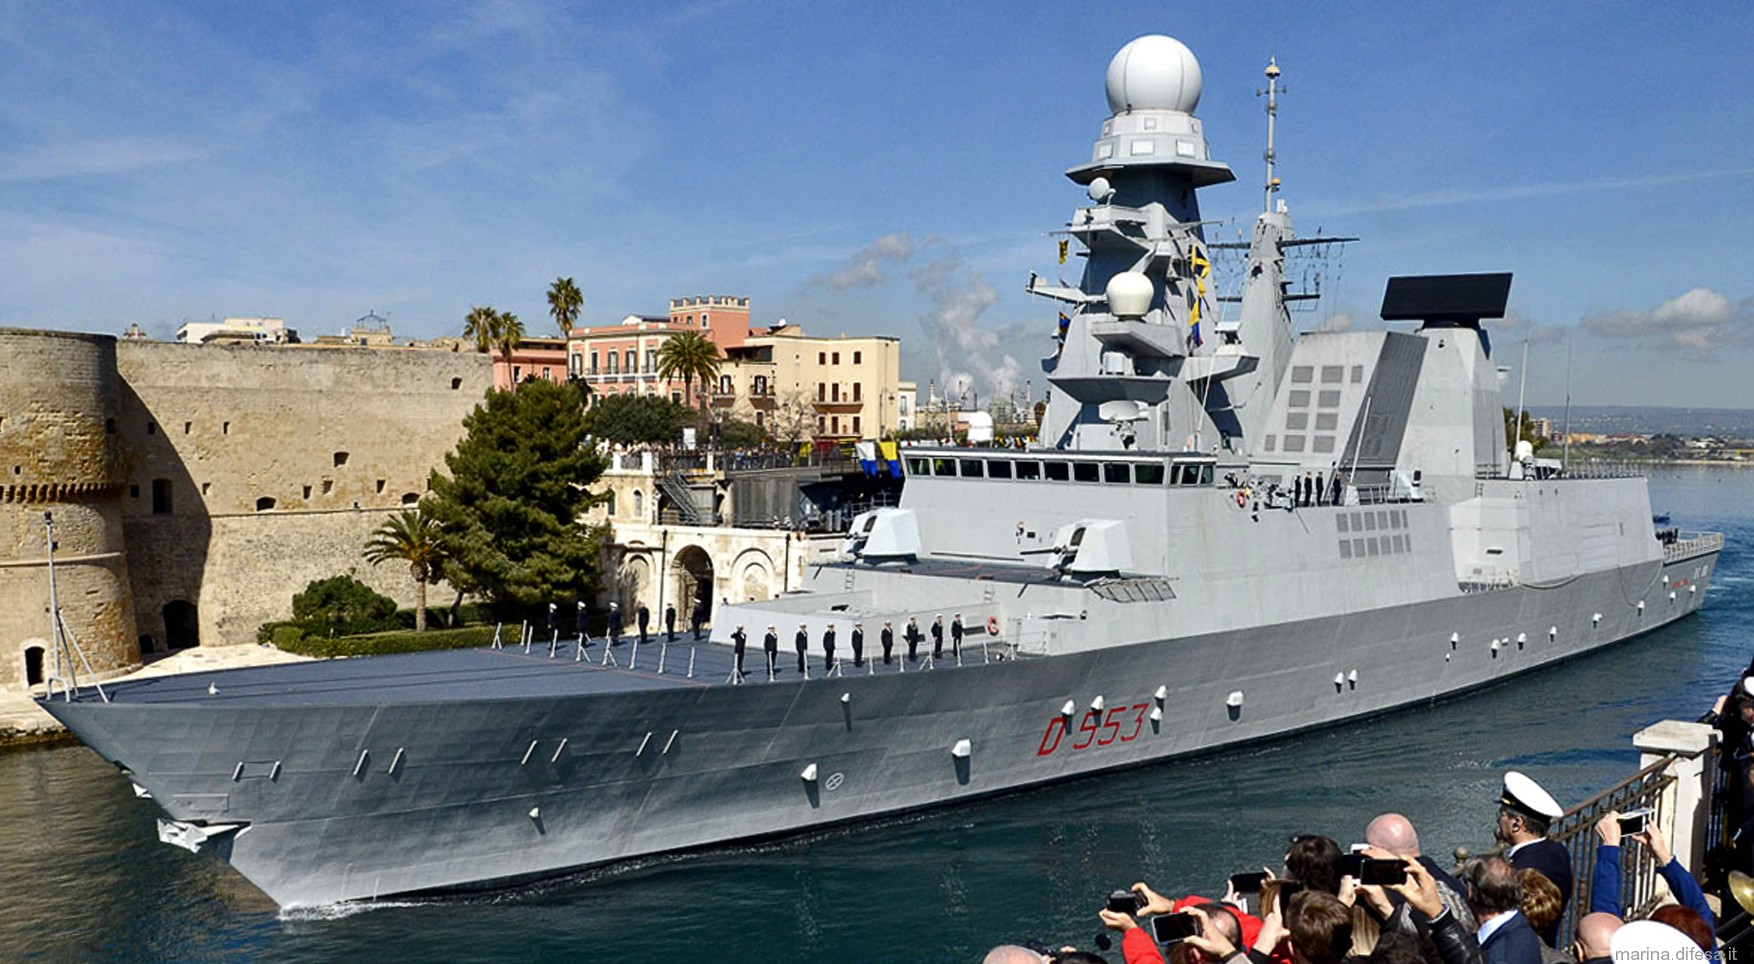 d-553 its andrea doria guided missile destroyer ddgh horizon class italian navy 21